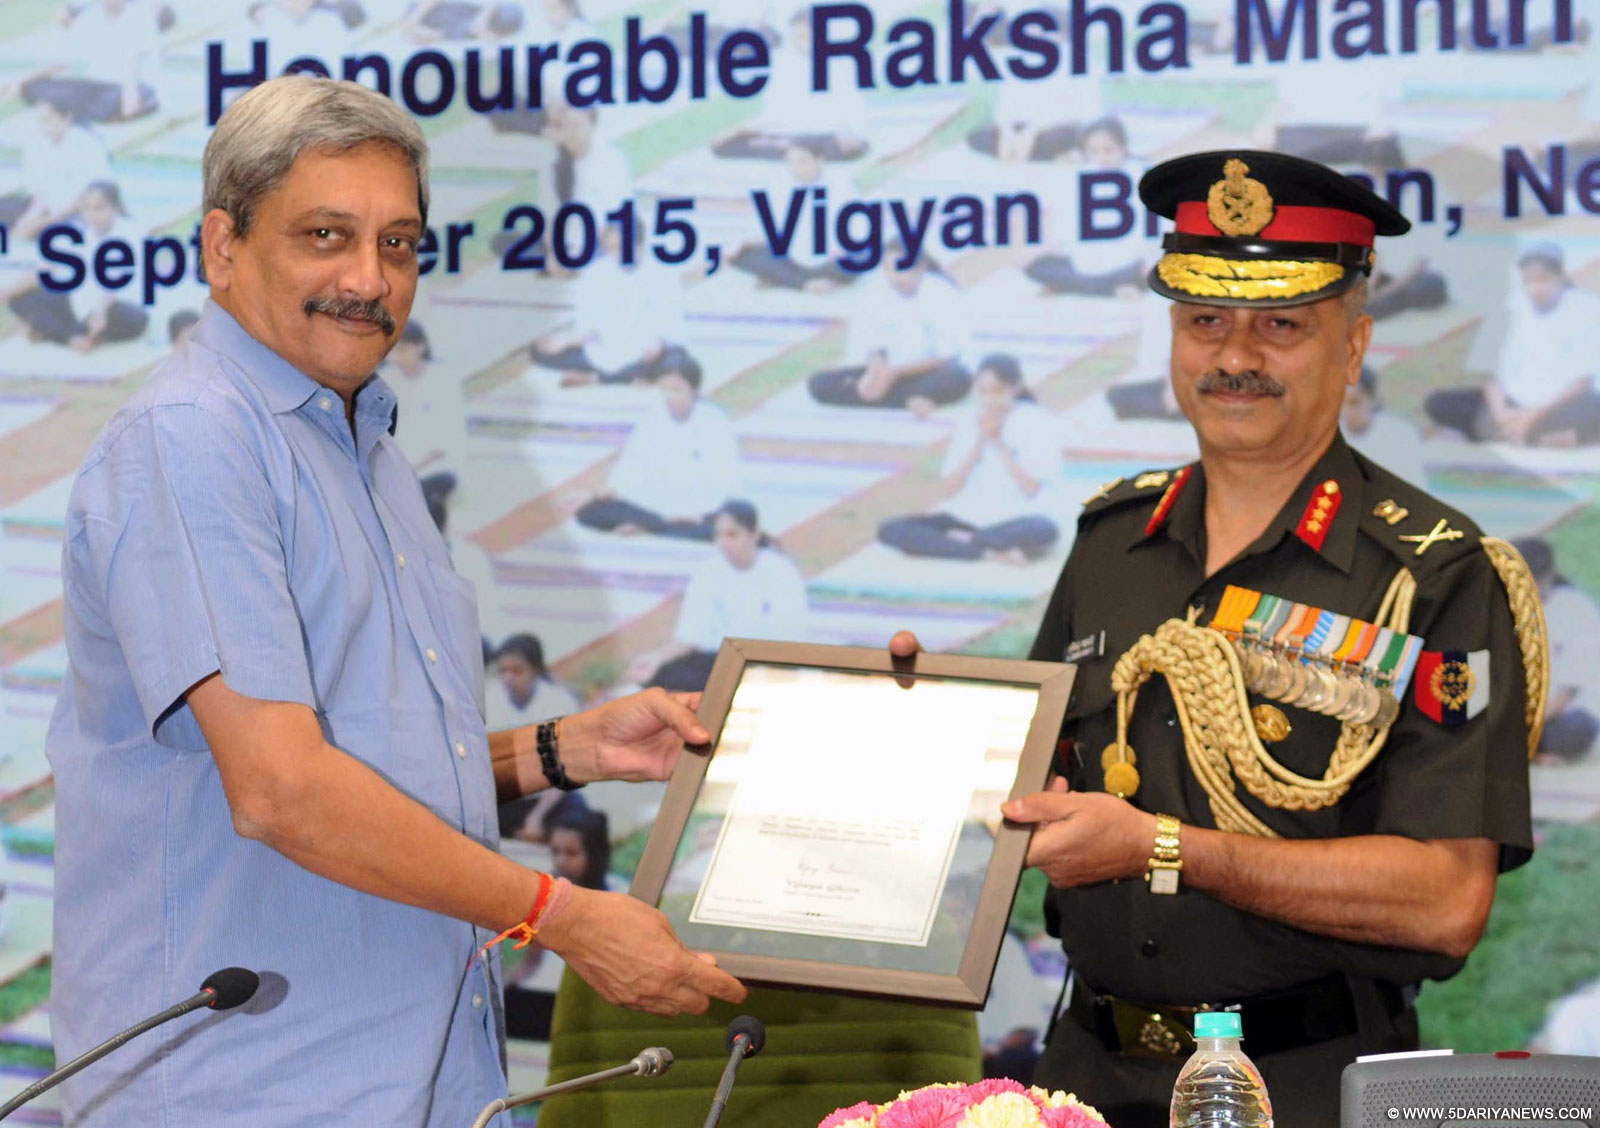 The Union Minister for Defence, Shri Manohar Parrikar presenting the certificate given by the Limca Book of Records to the Director General, NCC, Lt. Gen. A. Chakravarty for the largest Yoga performance simultaneously by a single uniformed youth organisation (NCC), in New Delhi on September 24, 2015.